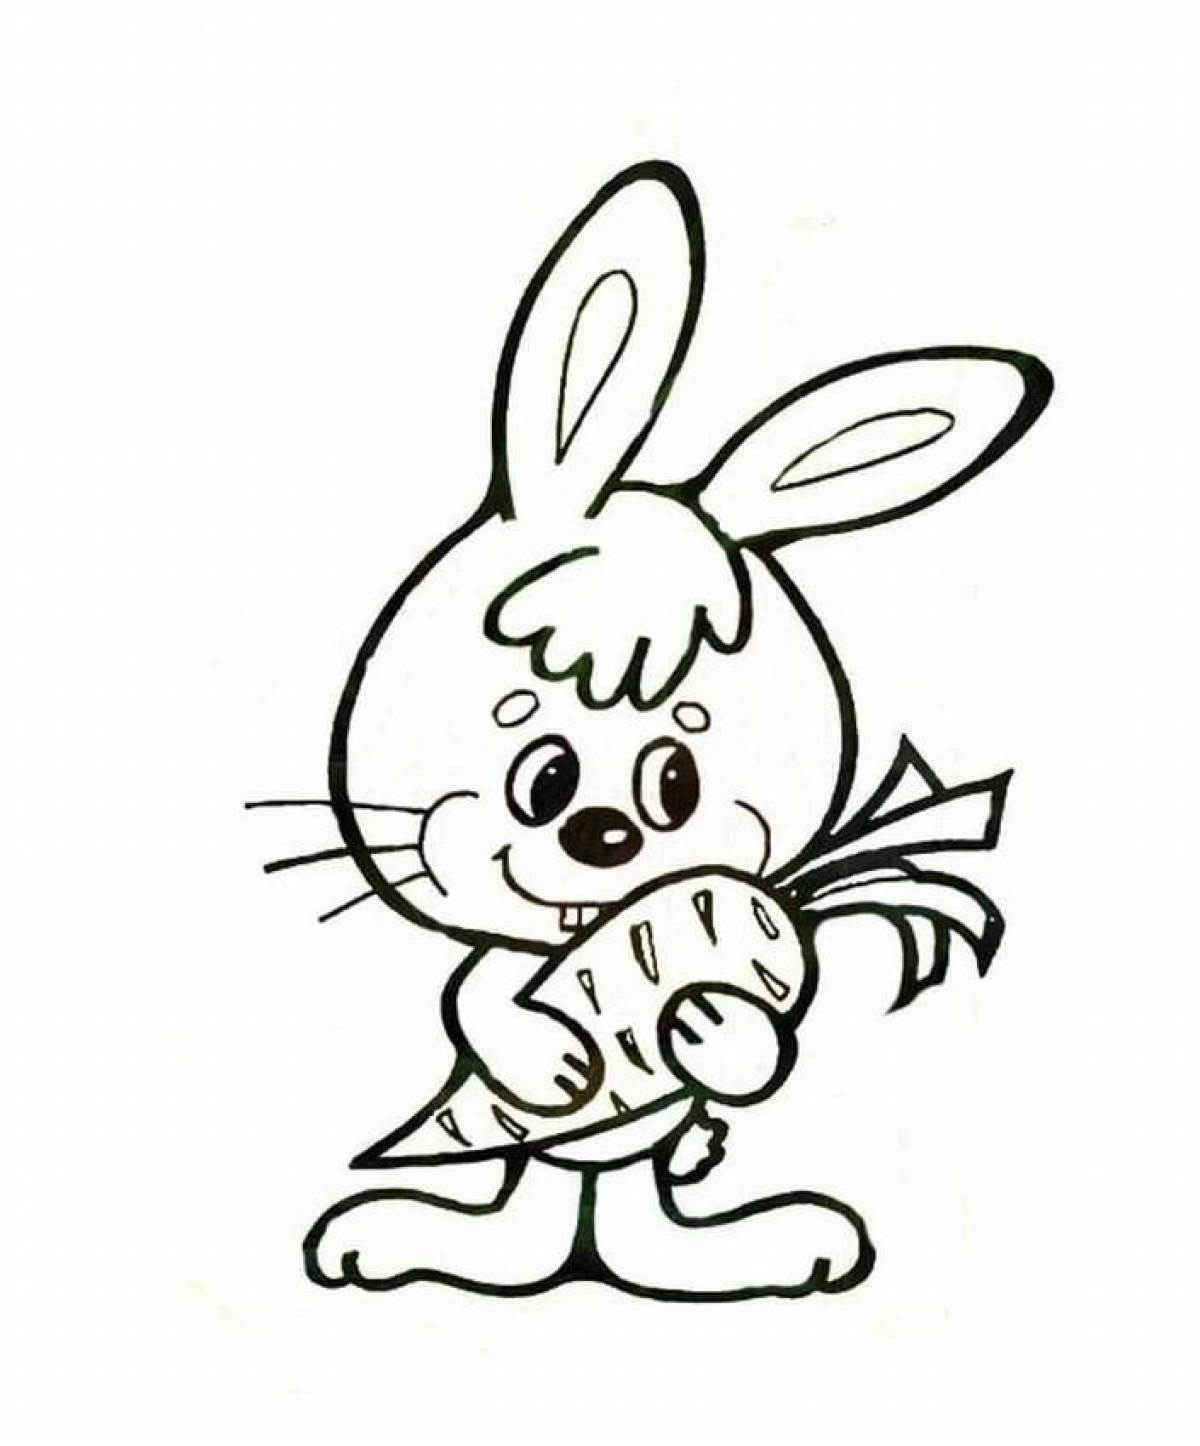 Coloring book cheerful hare for children 3-4 years old